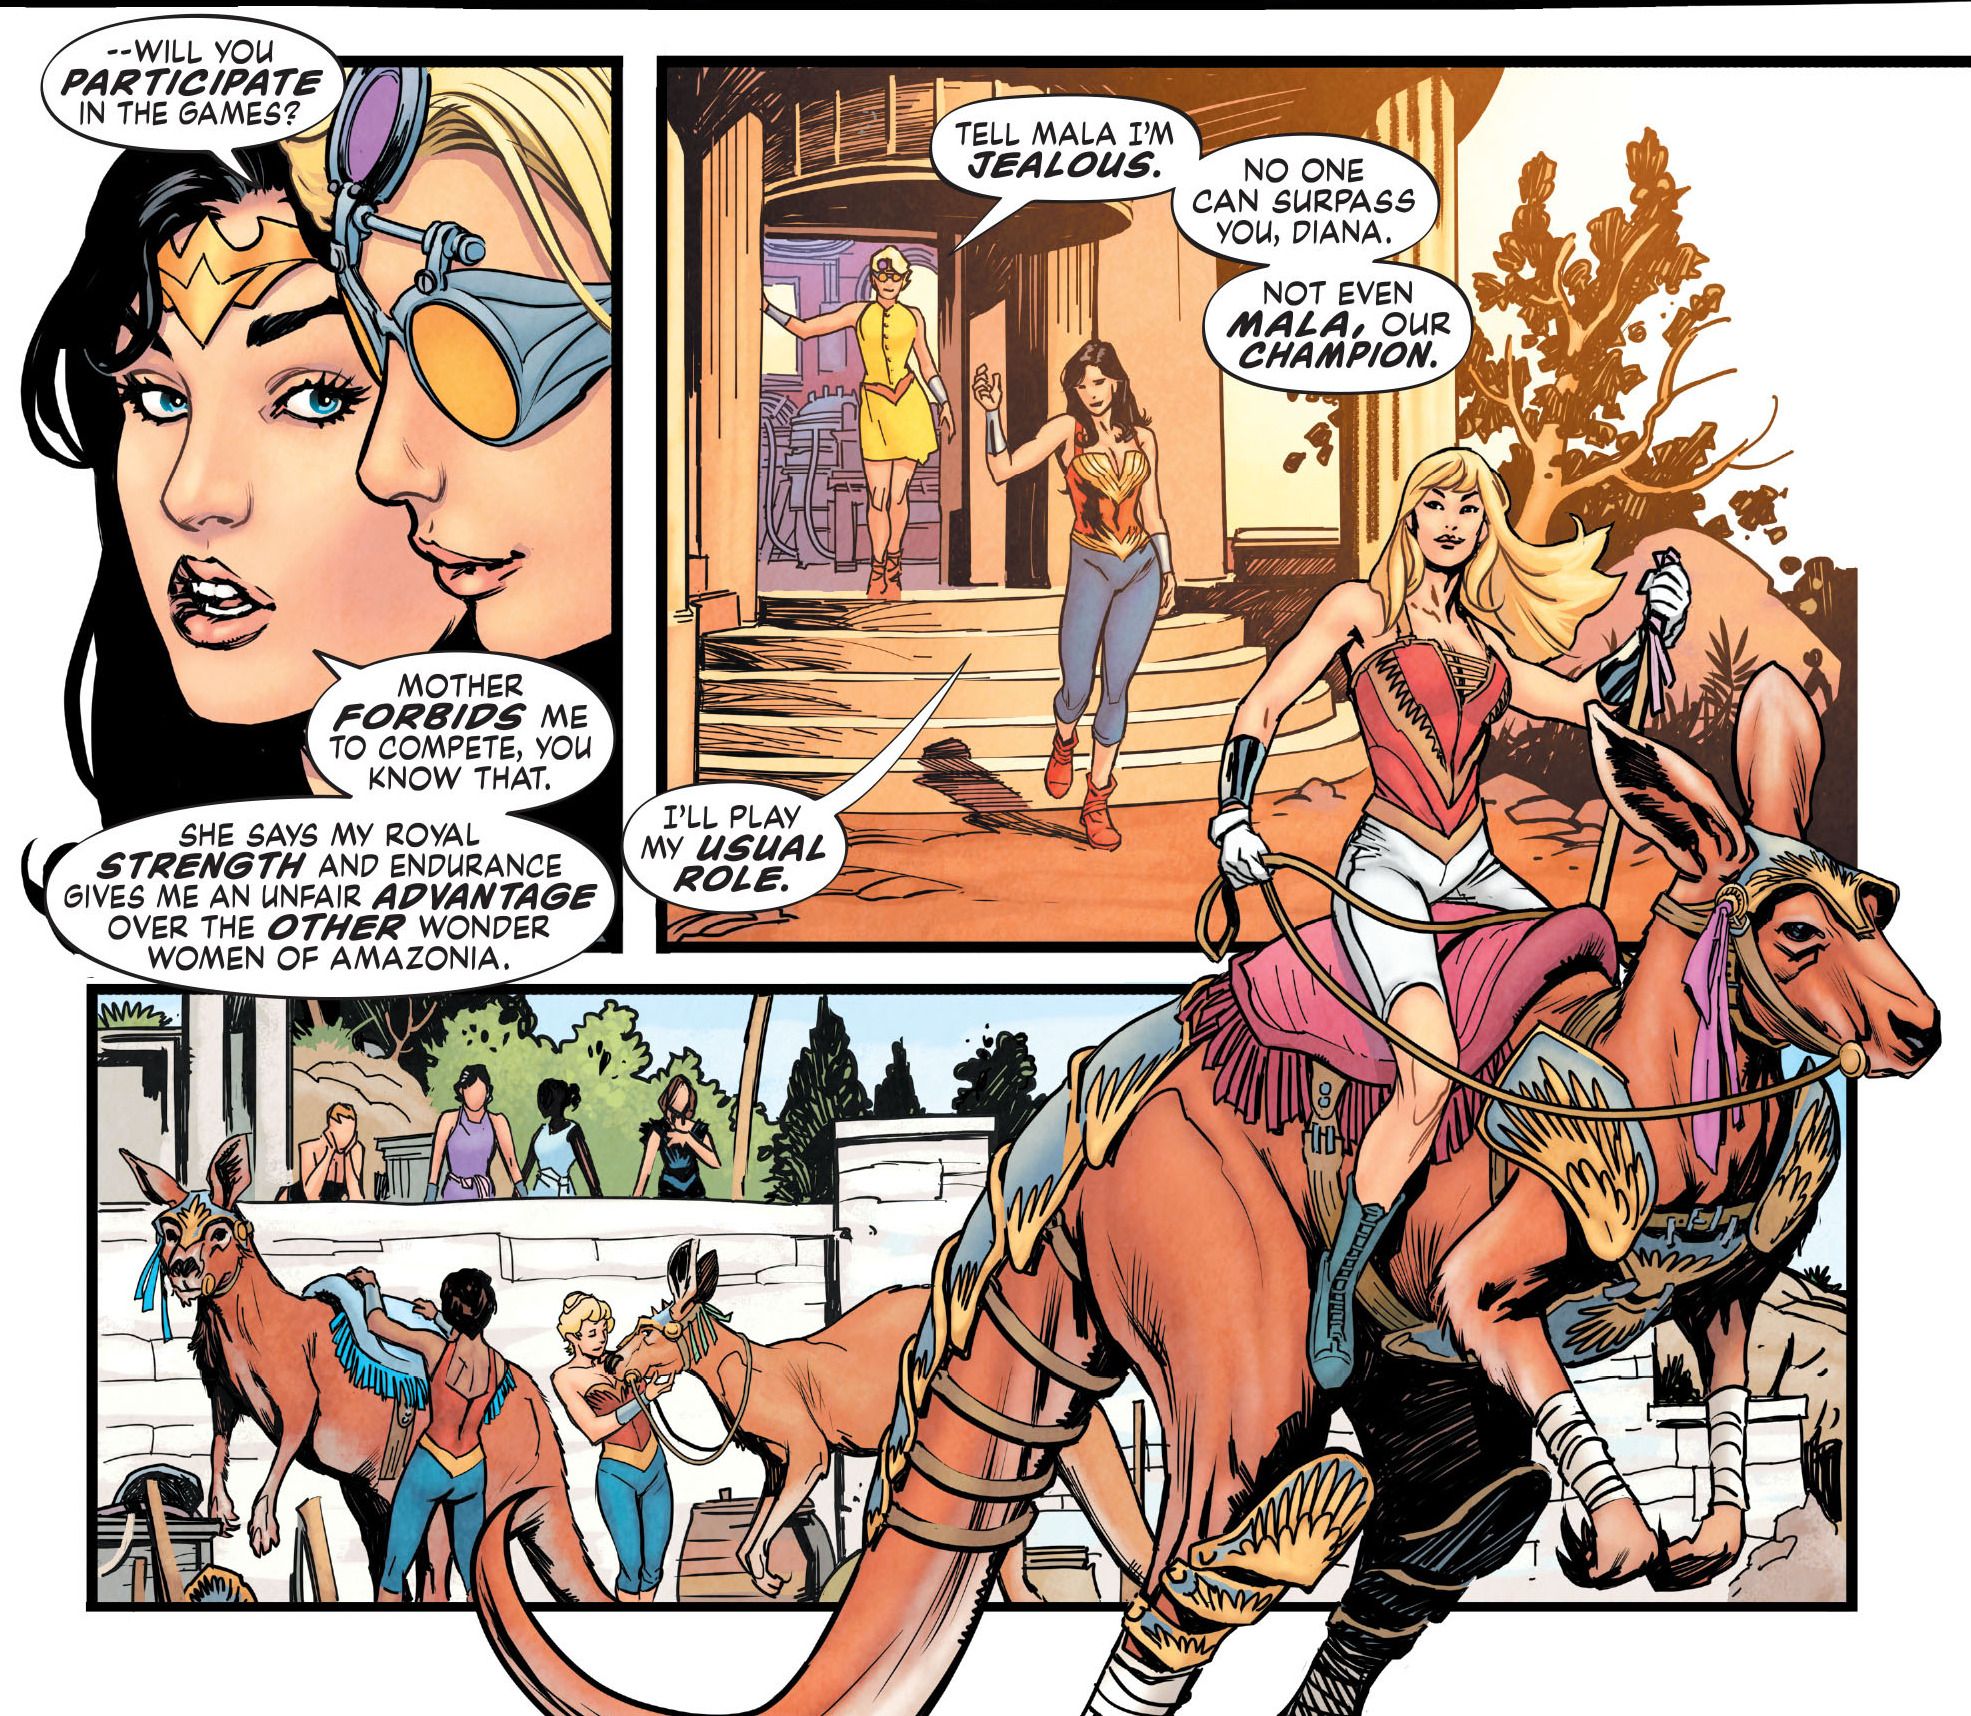 Comic book panels: Amazon women talk to each other while caring for kangaroo like creatures.